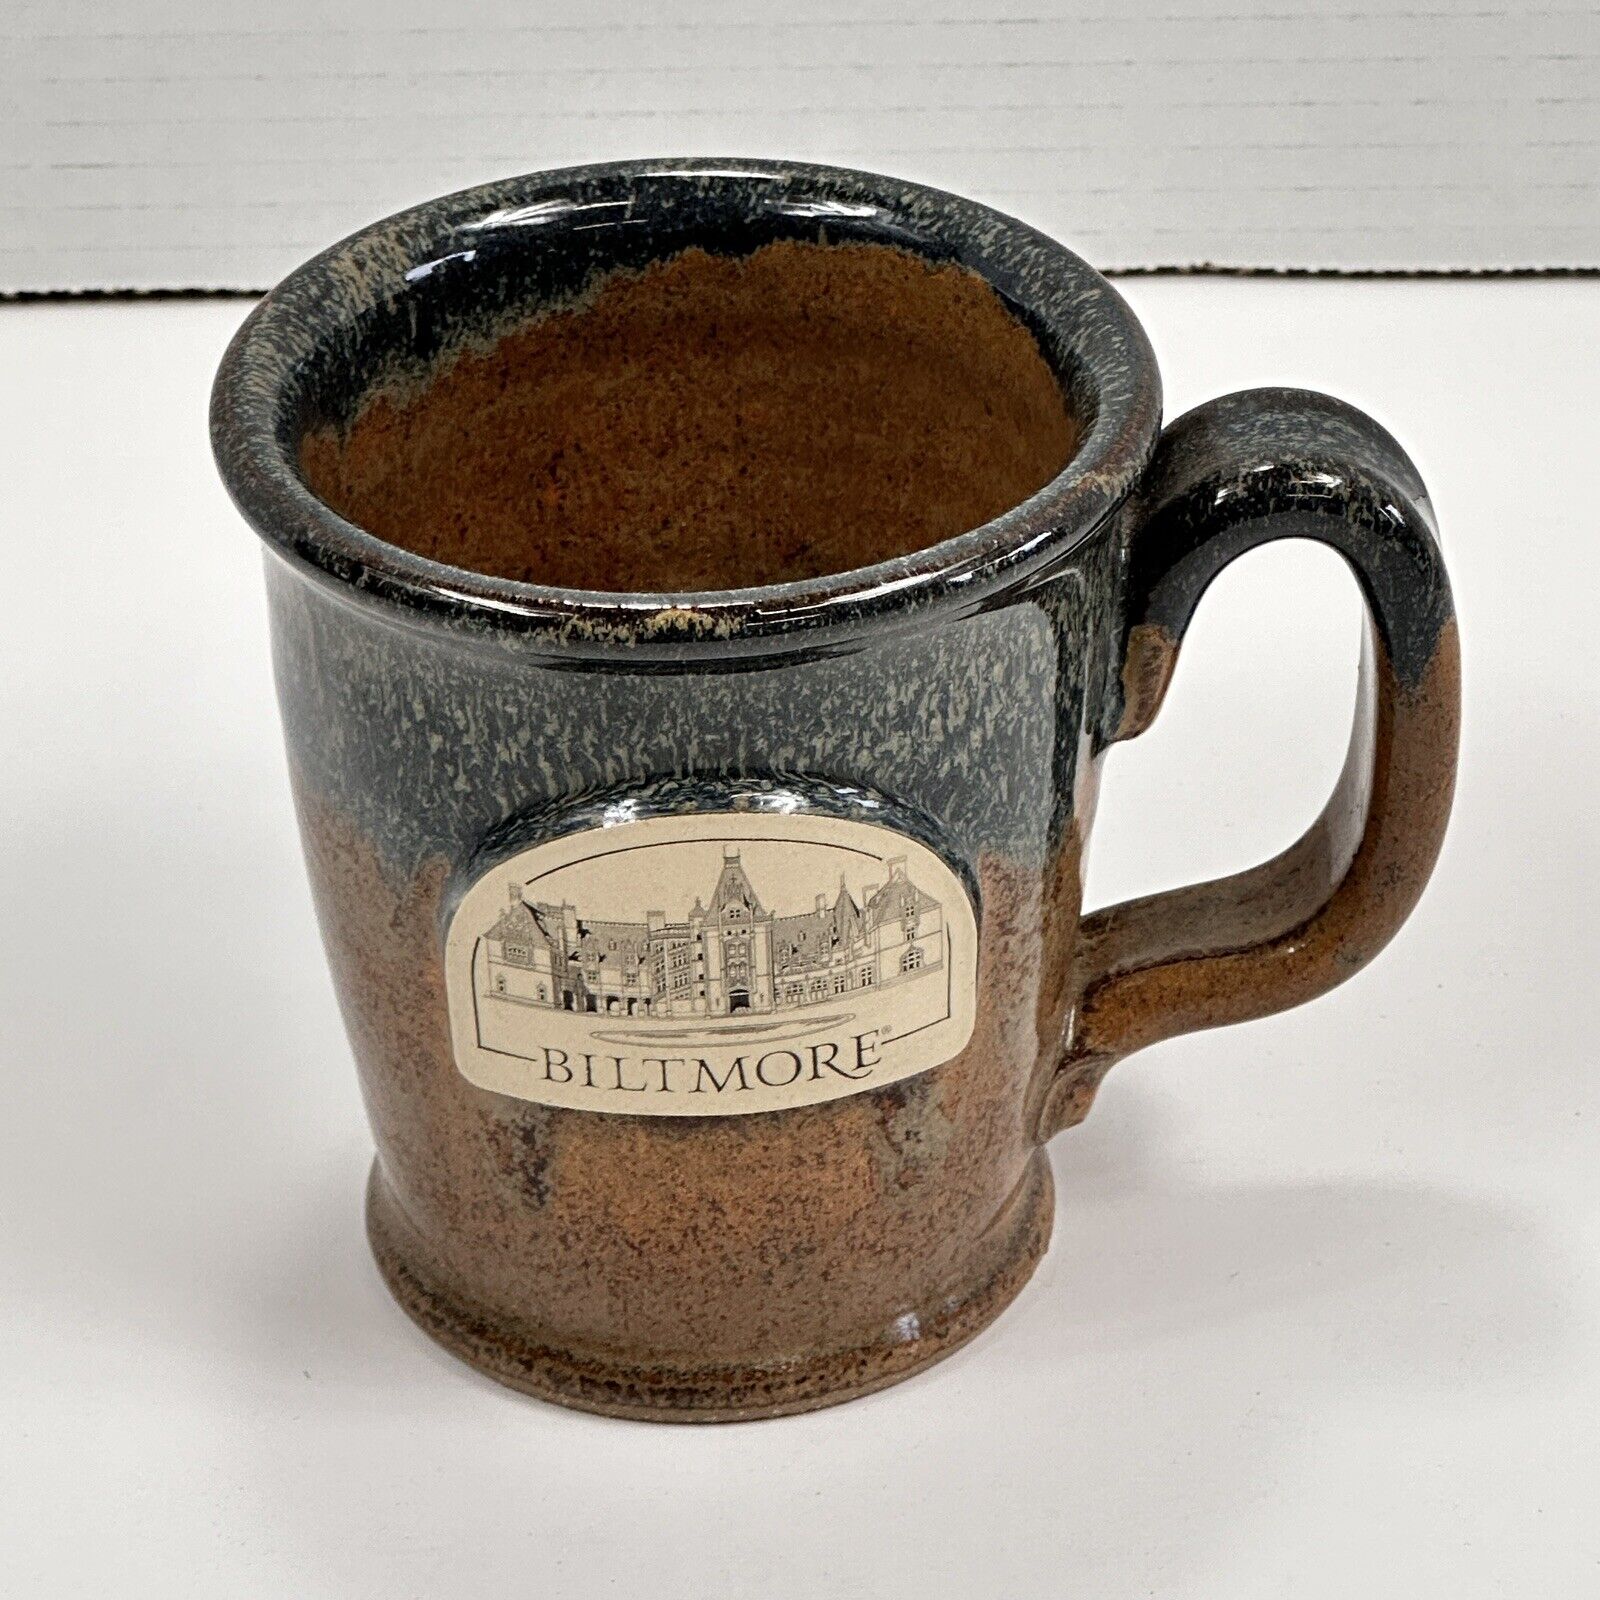 Sunset Hill Stoneware “Biltmore” Collectible Artisan Coffee Mug Pottery Cup